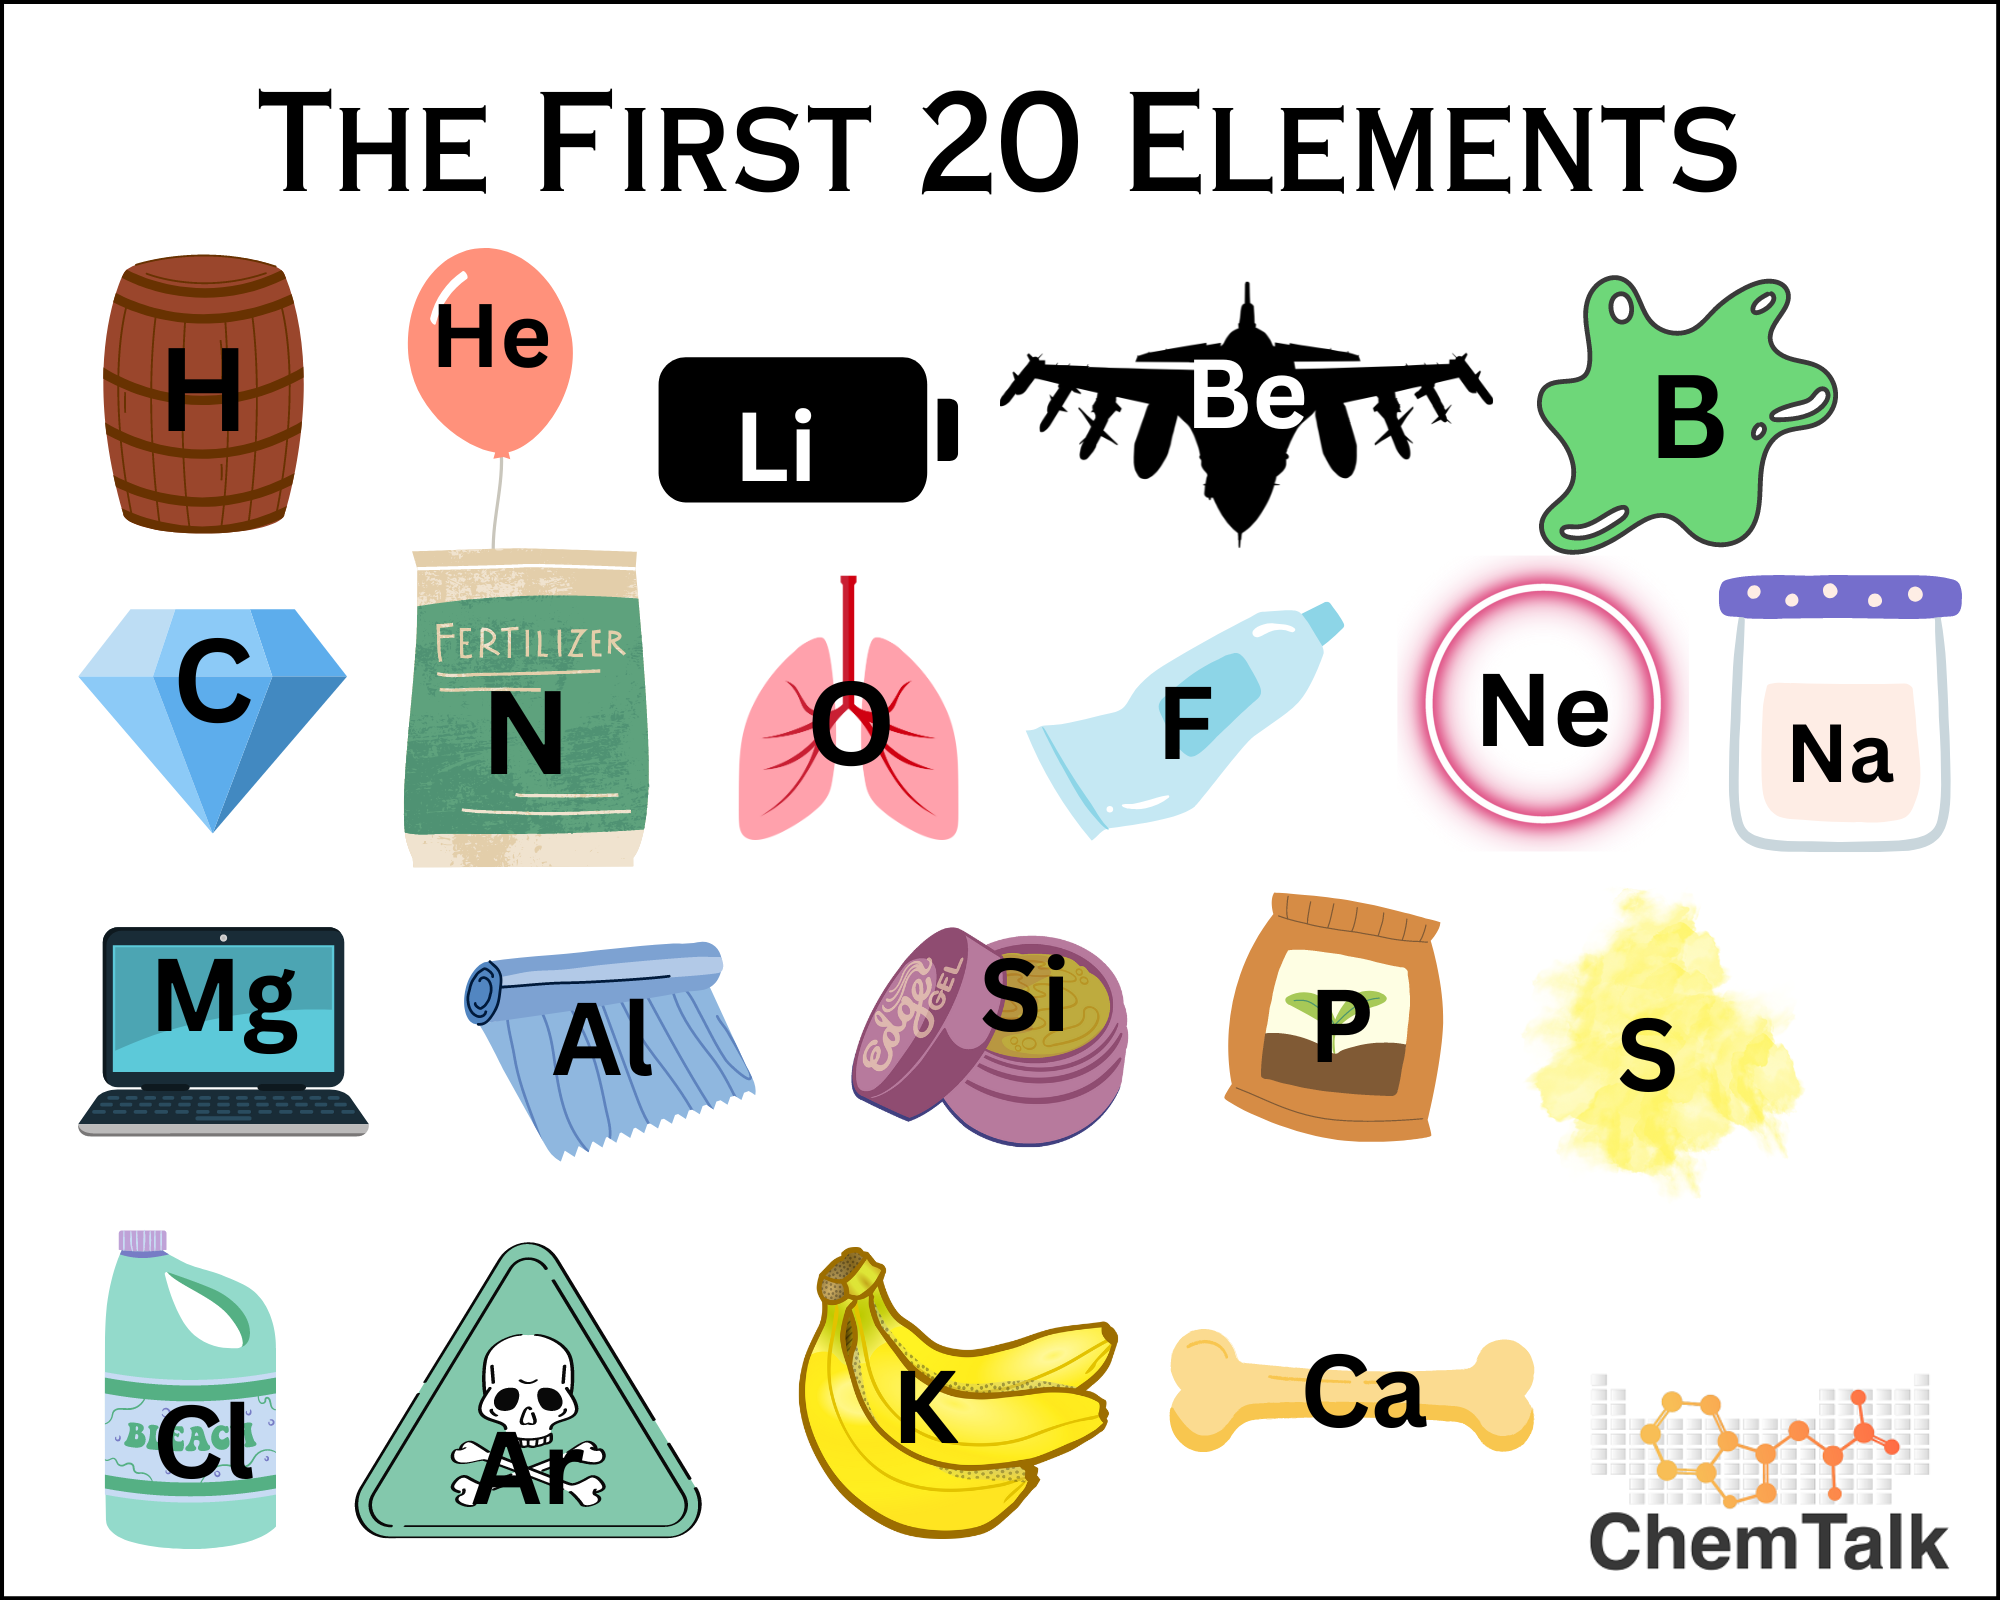 the first 20 elements image